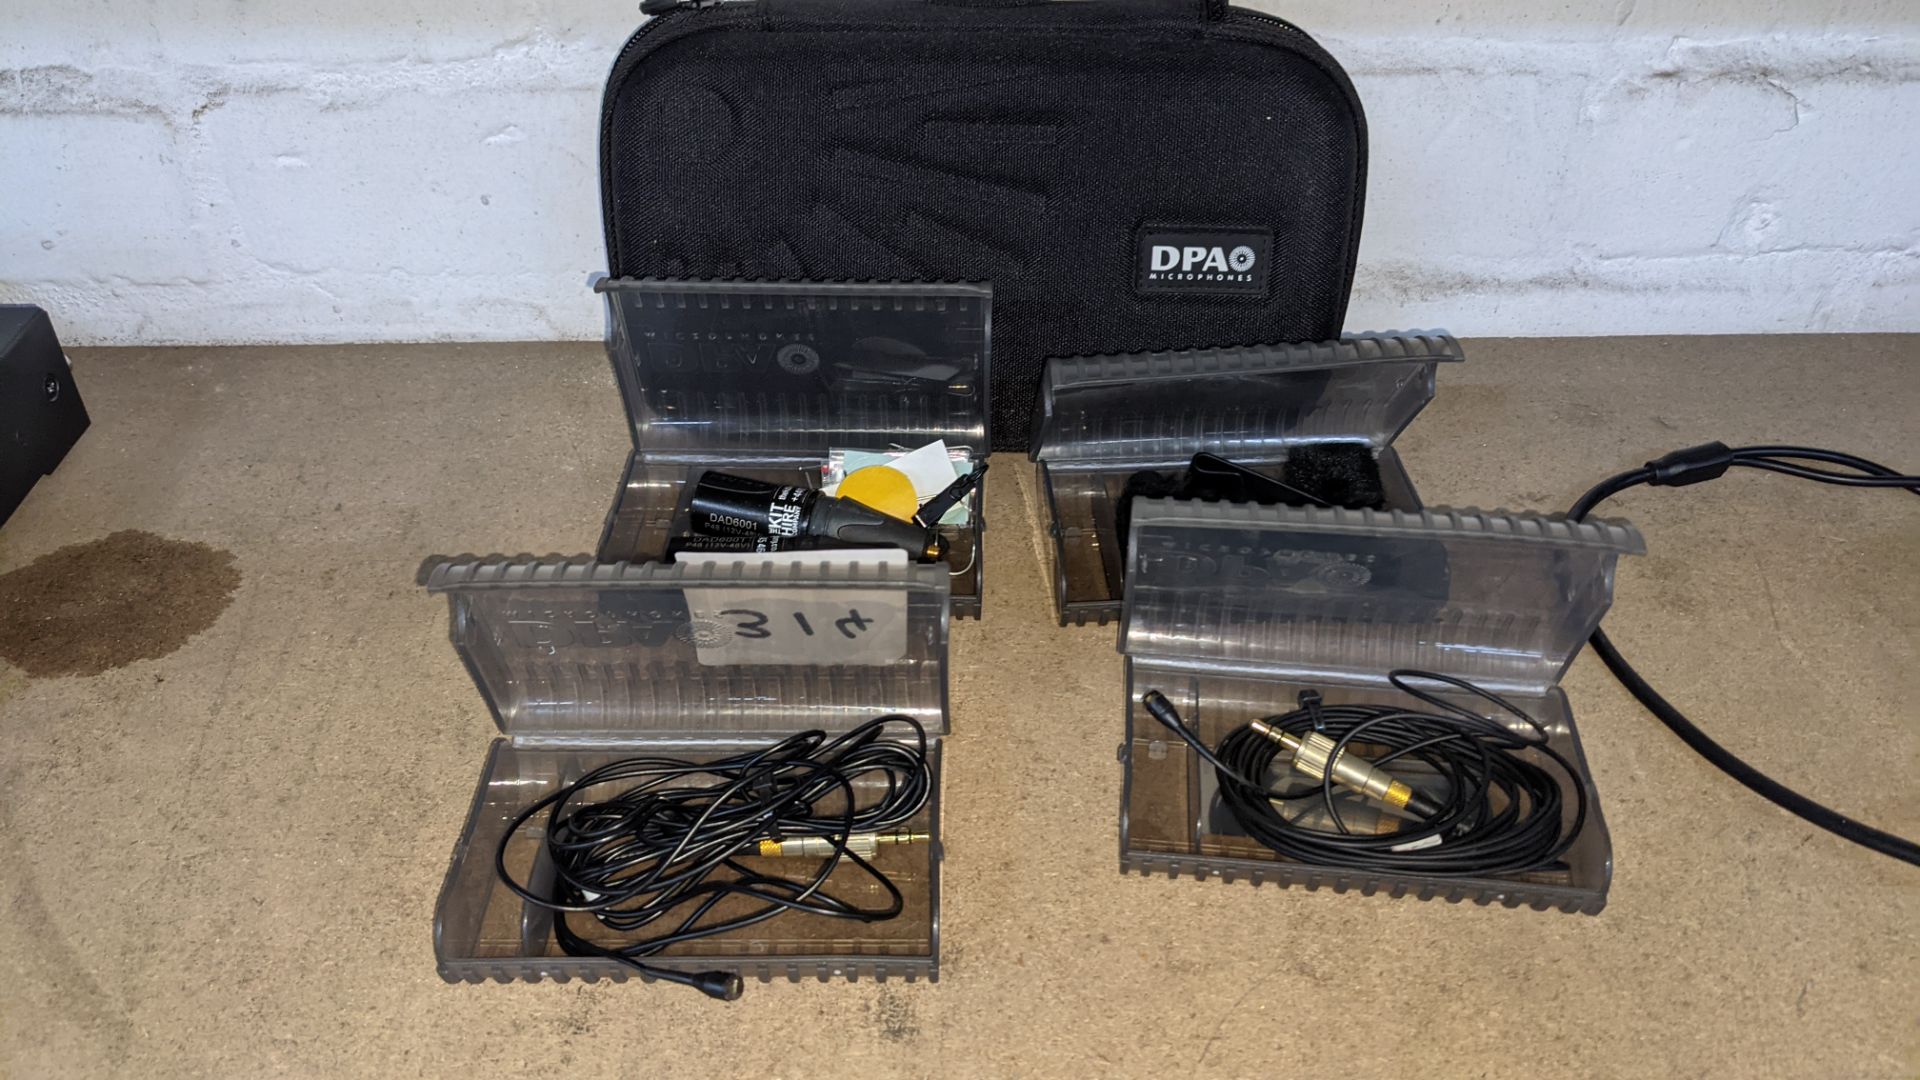 2 off DPA SMK-SC4060 Stereo Mic Kit with SC4060-BM complete with XLR and minijack microdot adapters